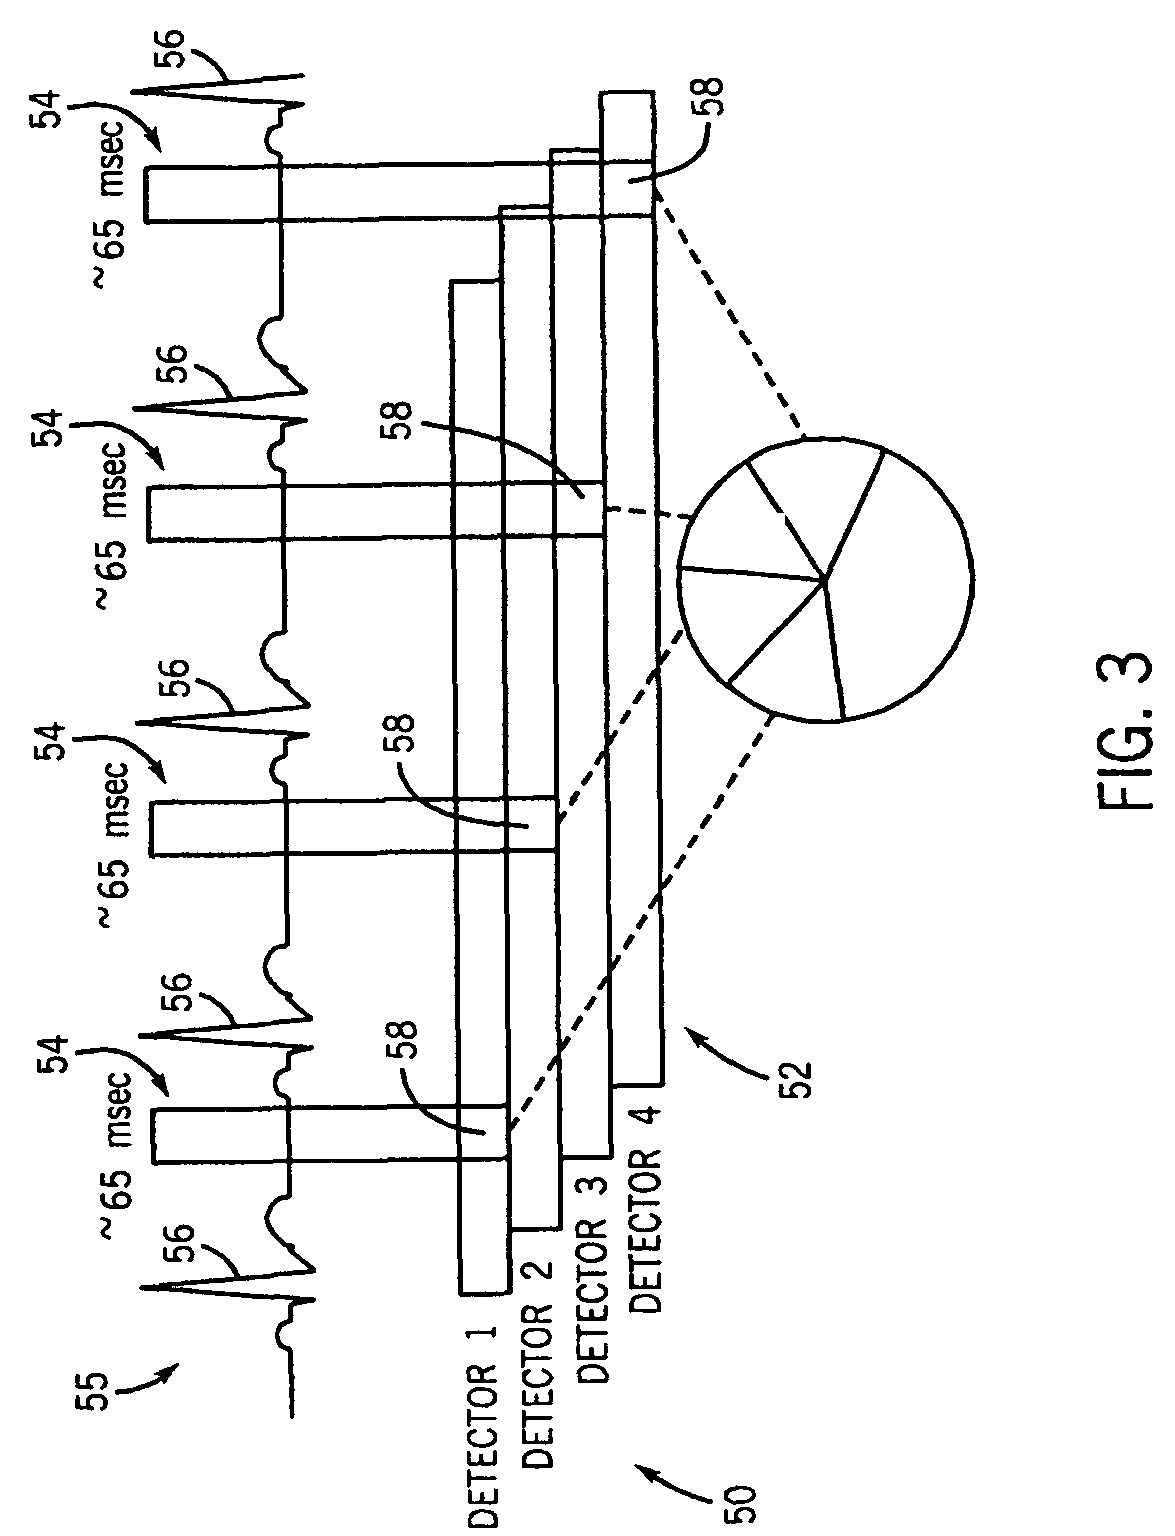 Method and apparatus of multi-phase cardiac imaging